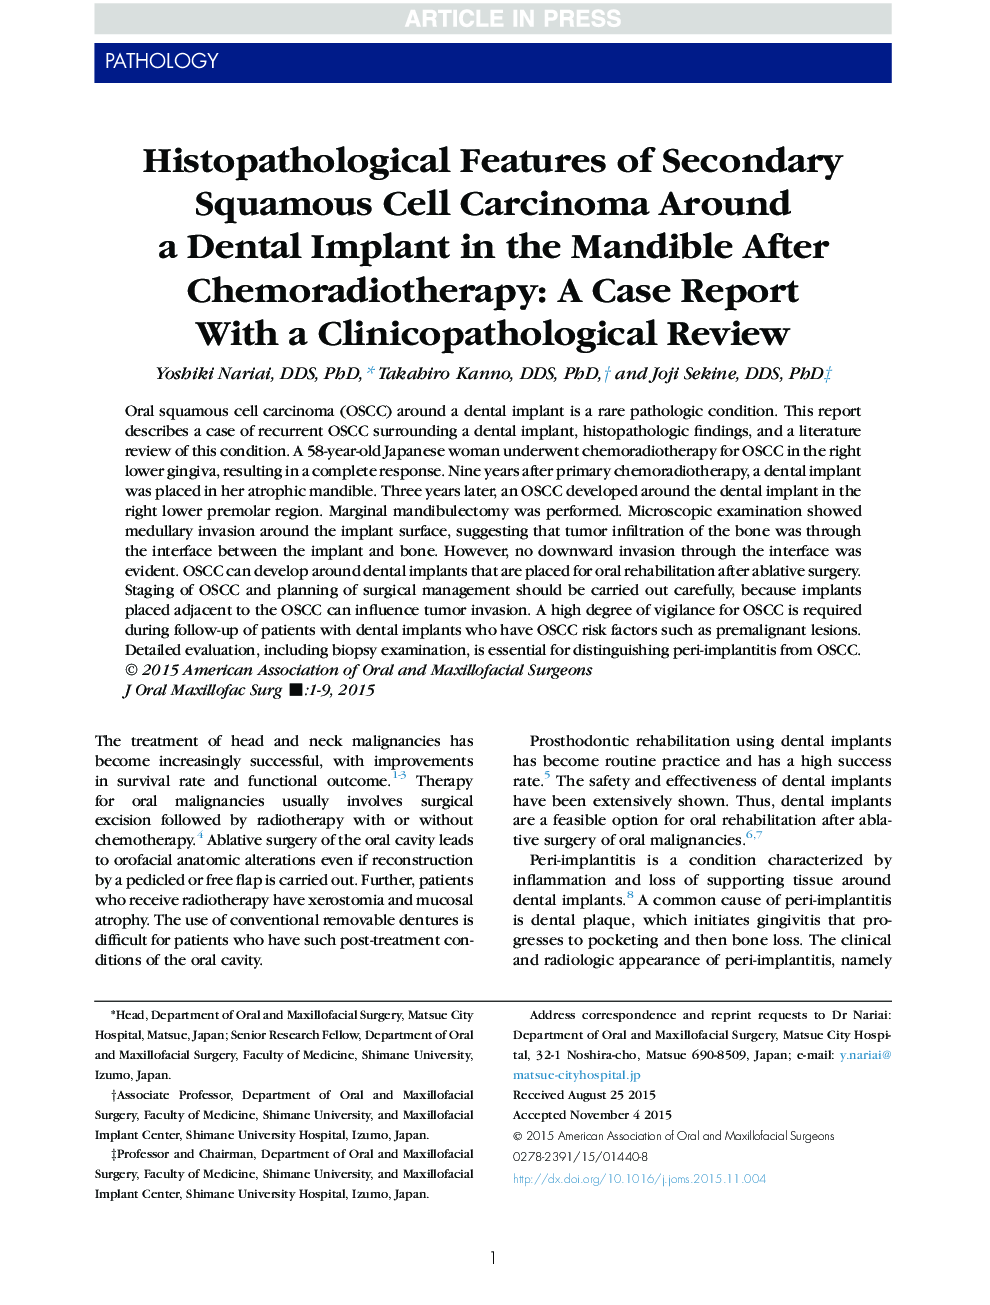 Histopathological Features of Secondary Squamous Cell Carcinoma Around a Dental Implant in the Mandible After Chemoradiotherapy: A Case Report With a Clinicopathological Review